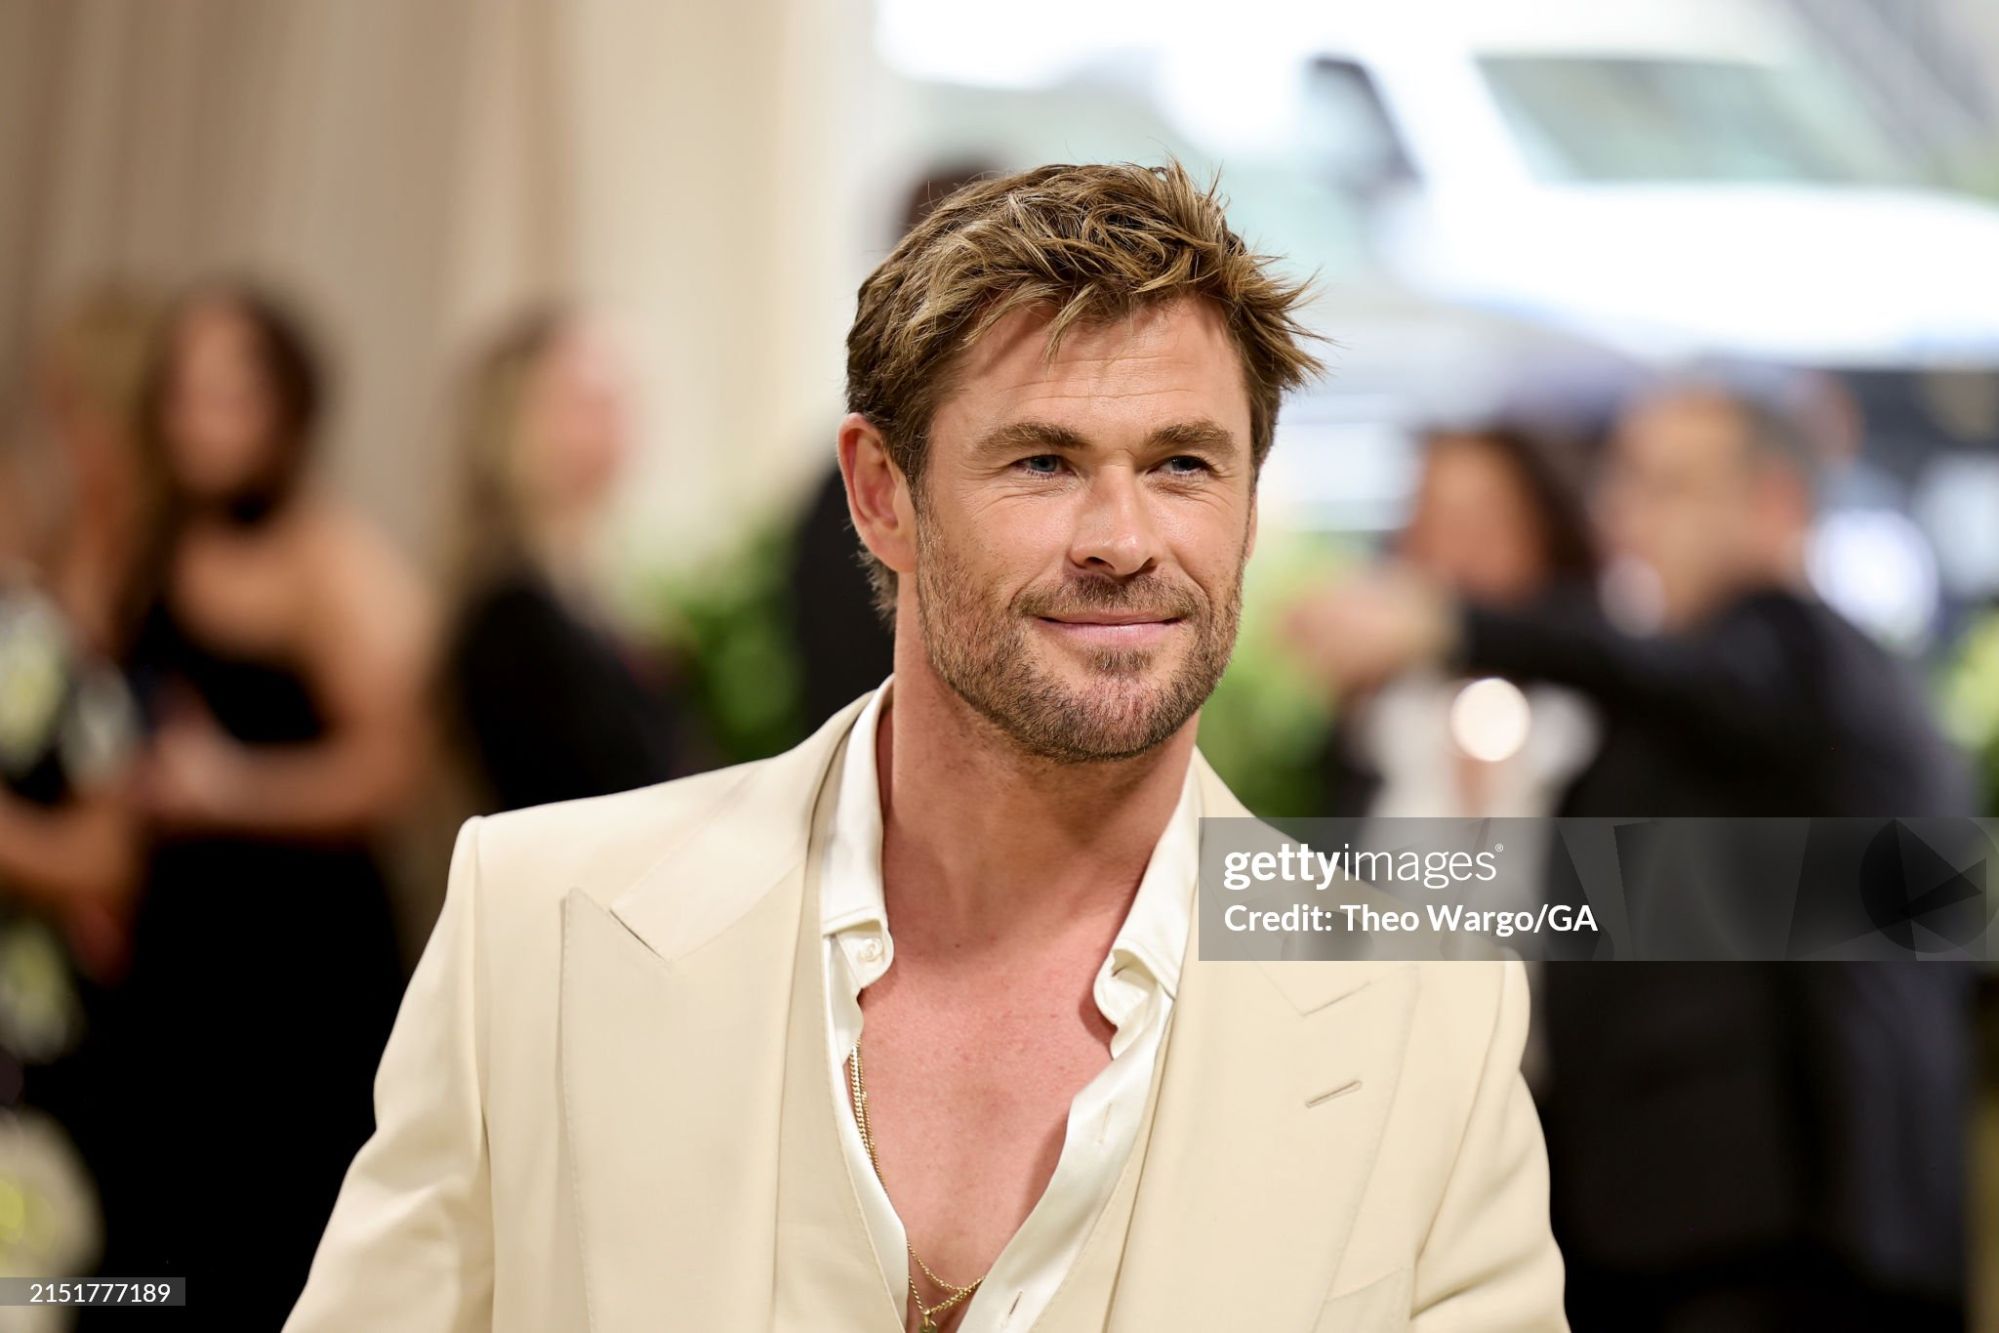 gettyimages-2151777189-2048x2048.jpg